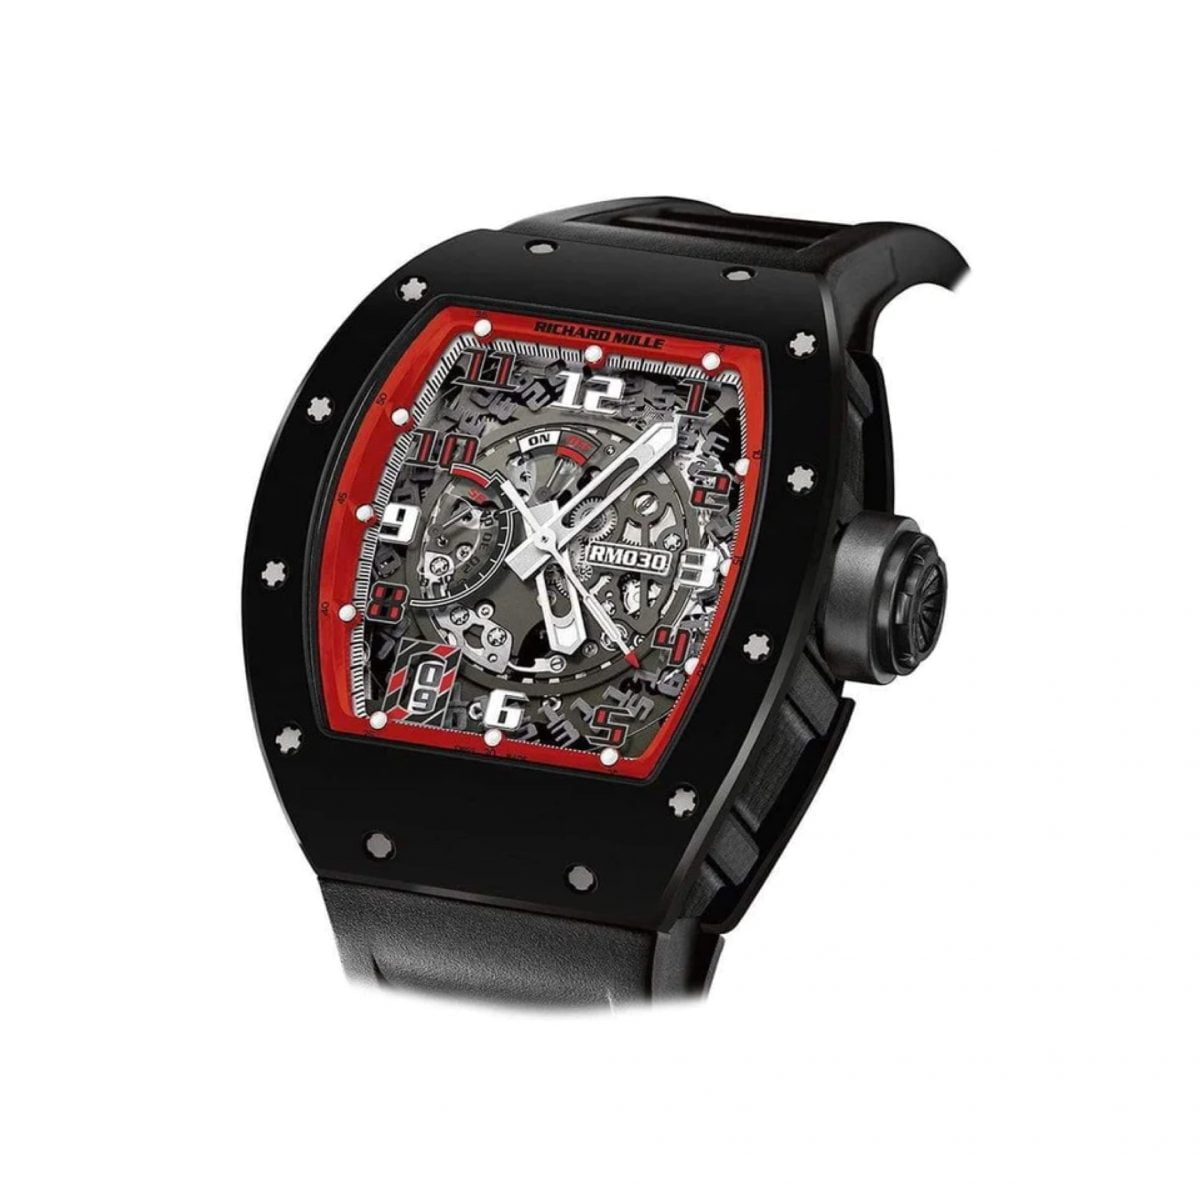 Richard Mille RM30 Automatic Black Dash Americans used 2018